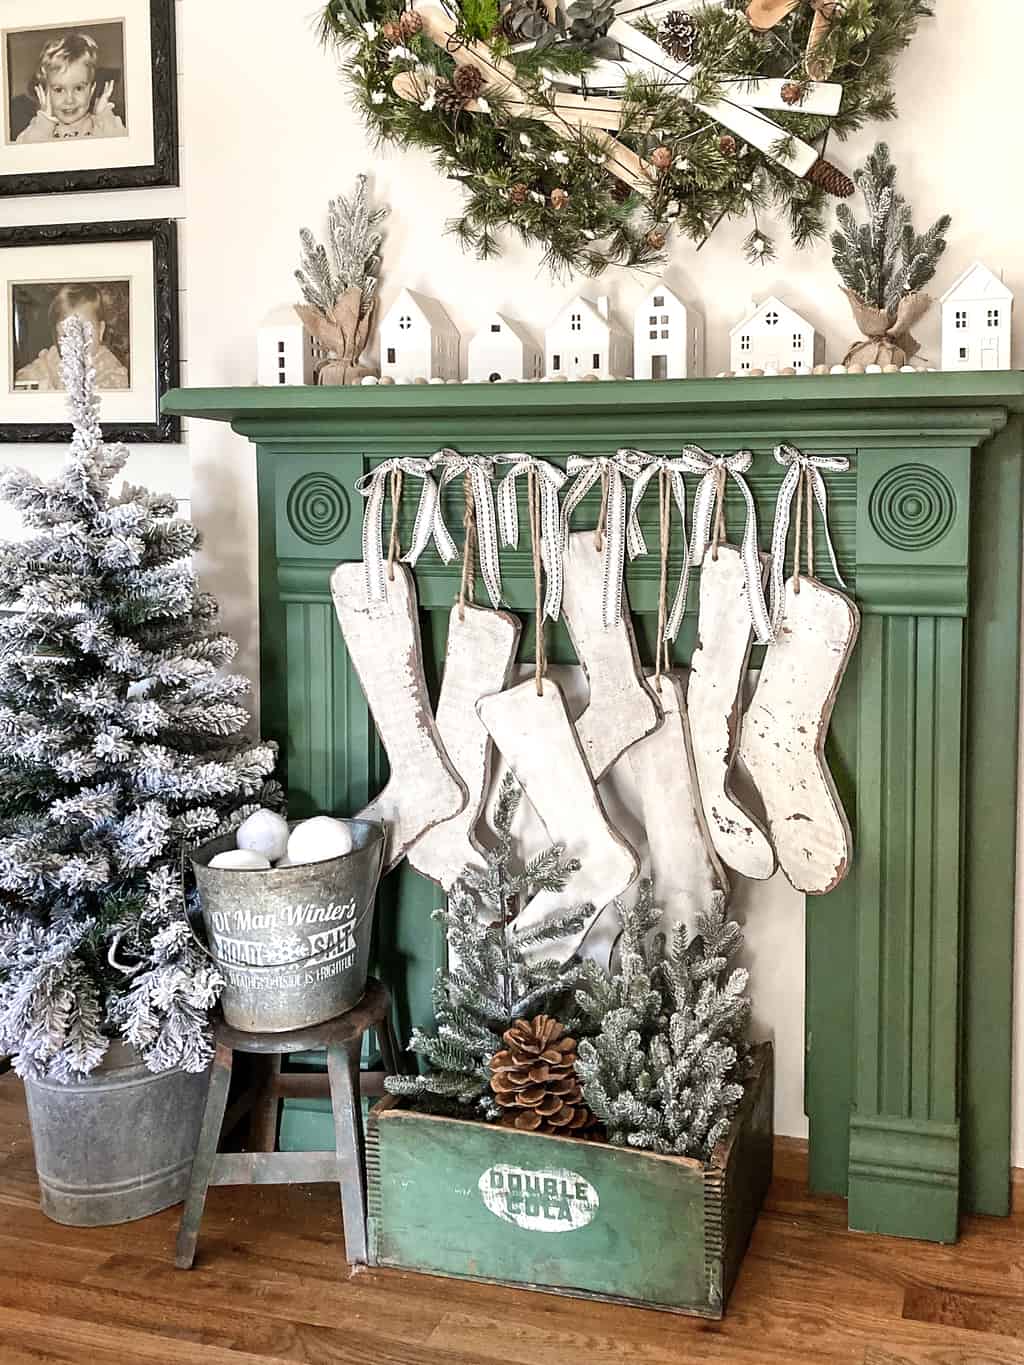 Stockings come in all shapes, sizes and colors. This tutorial will show you how to make DIY wood Christmas stockings from scrap wood and other supplies you may have on hand.